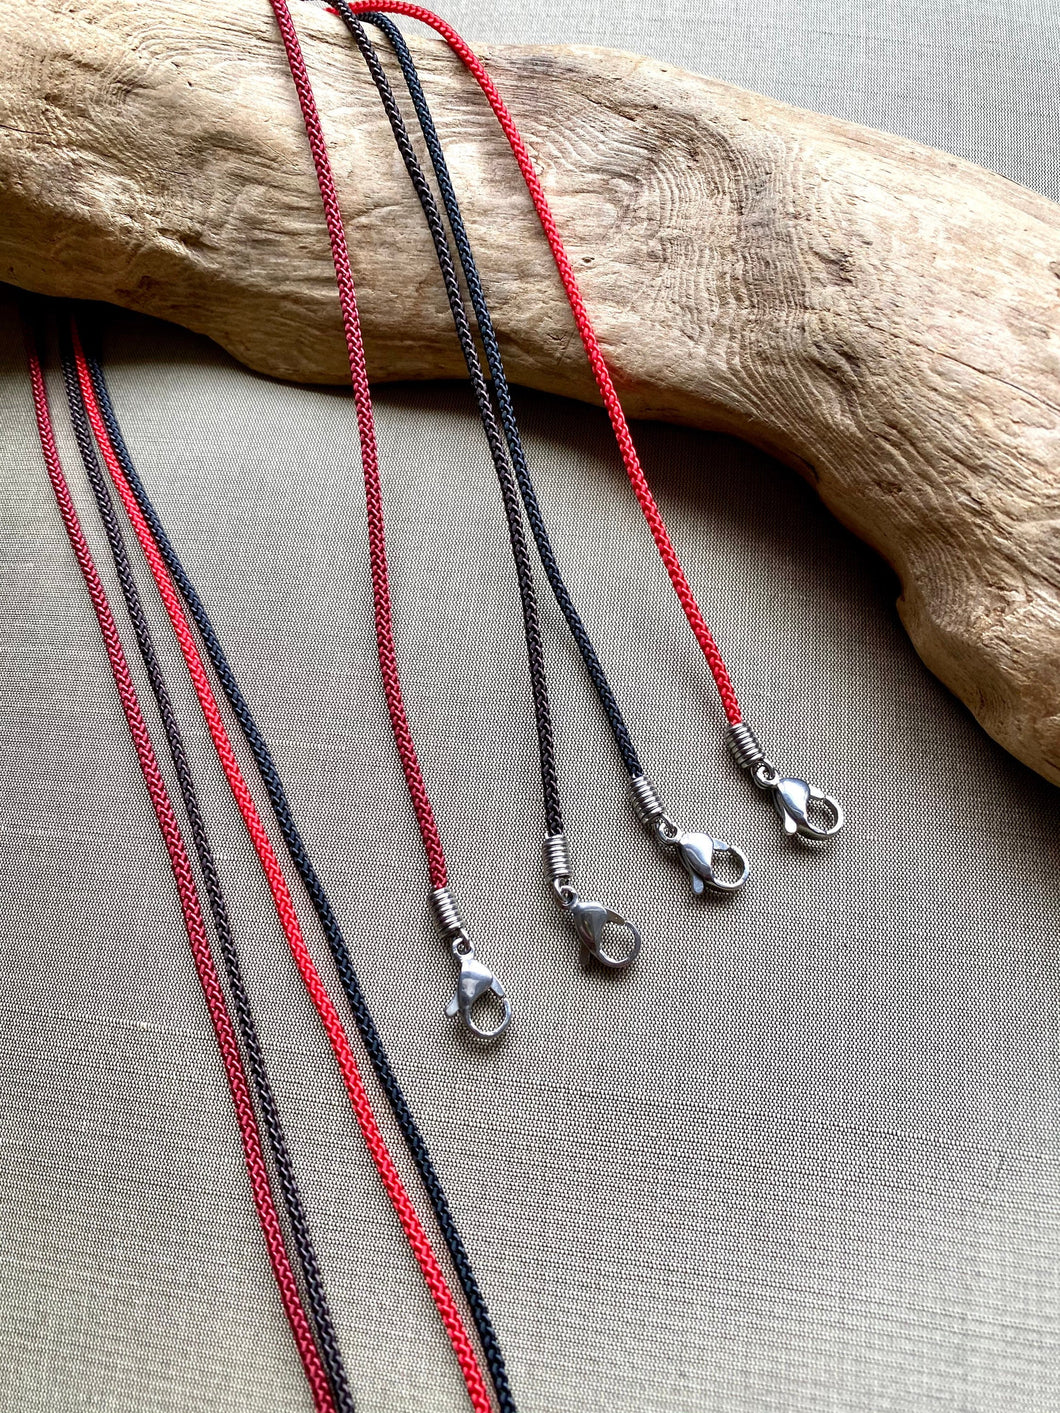 Waterproof Necklace, Black Cord Necklace, Red Cord Necklace